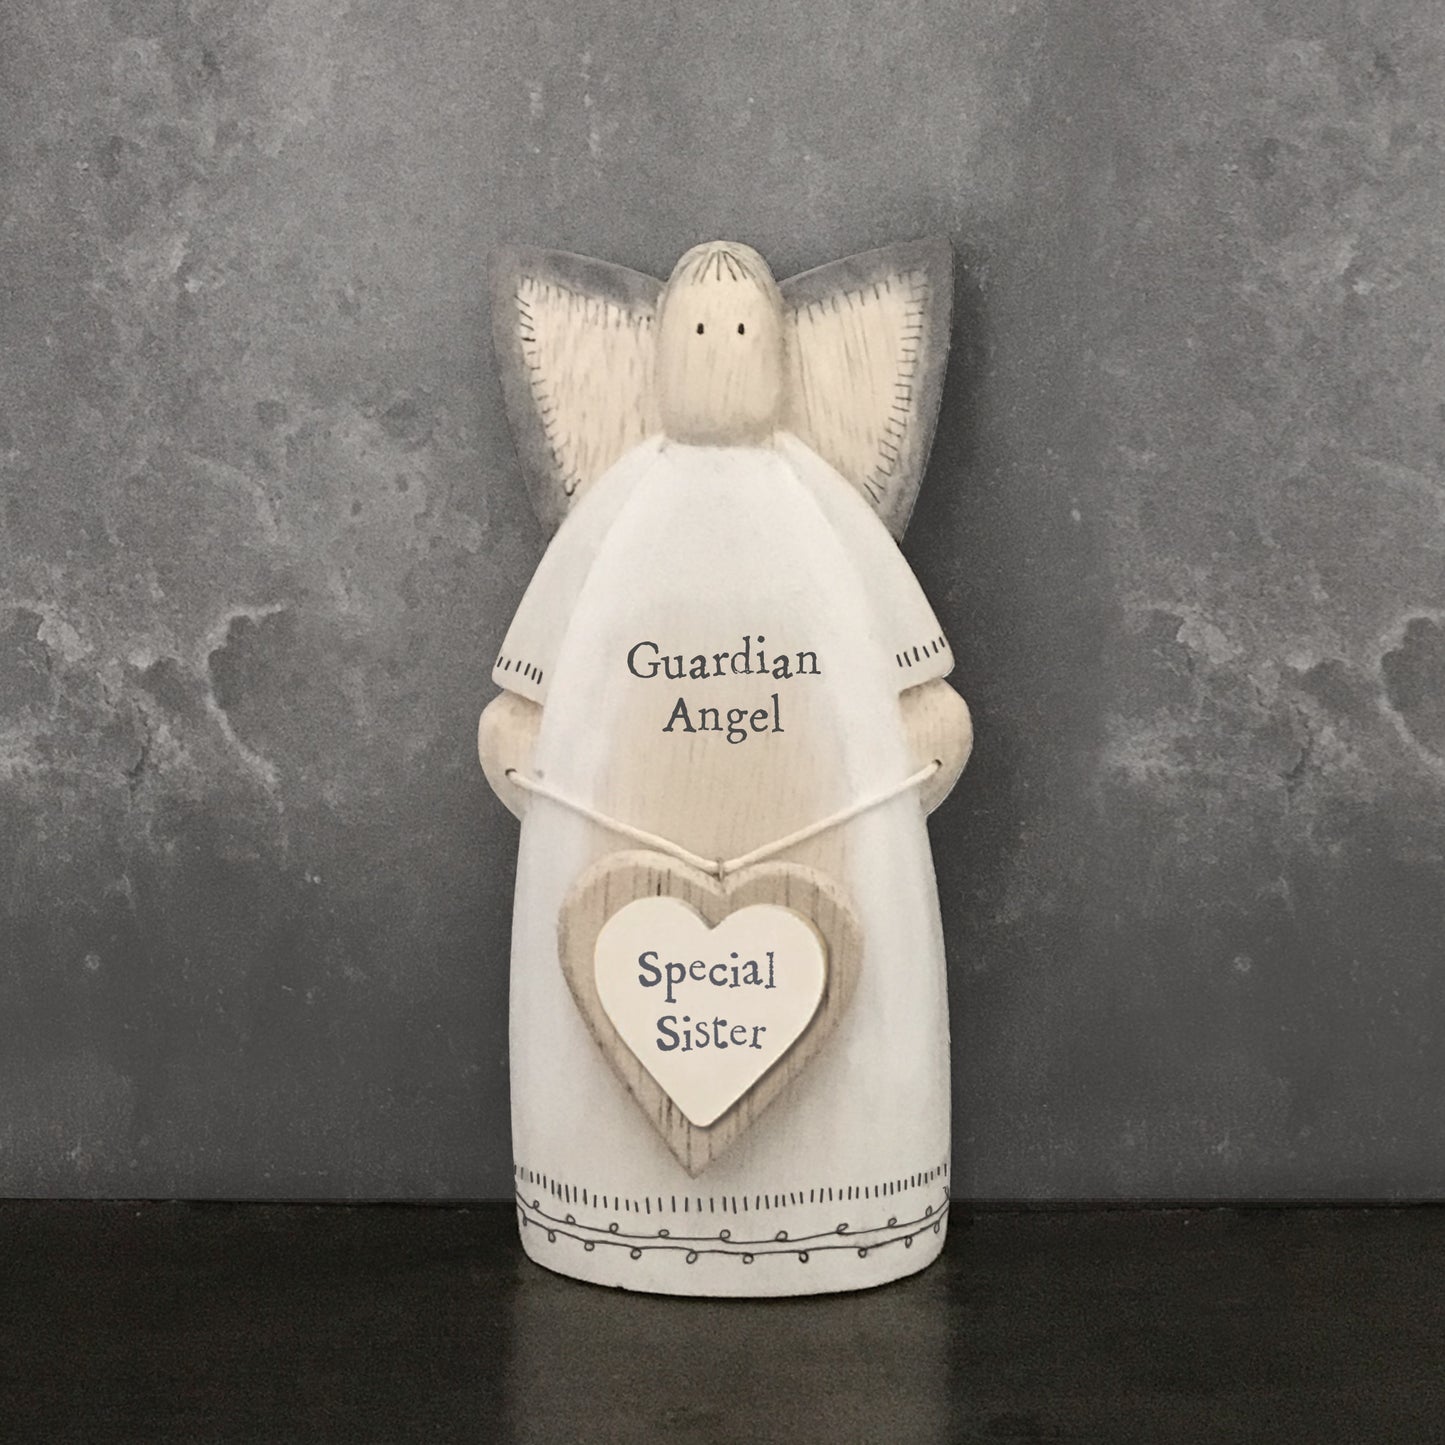 East Of India Special Sister Guardian Angel Wooden Ornament